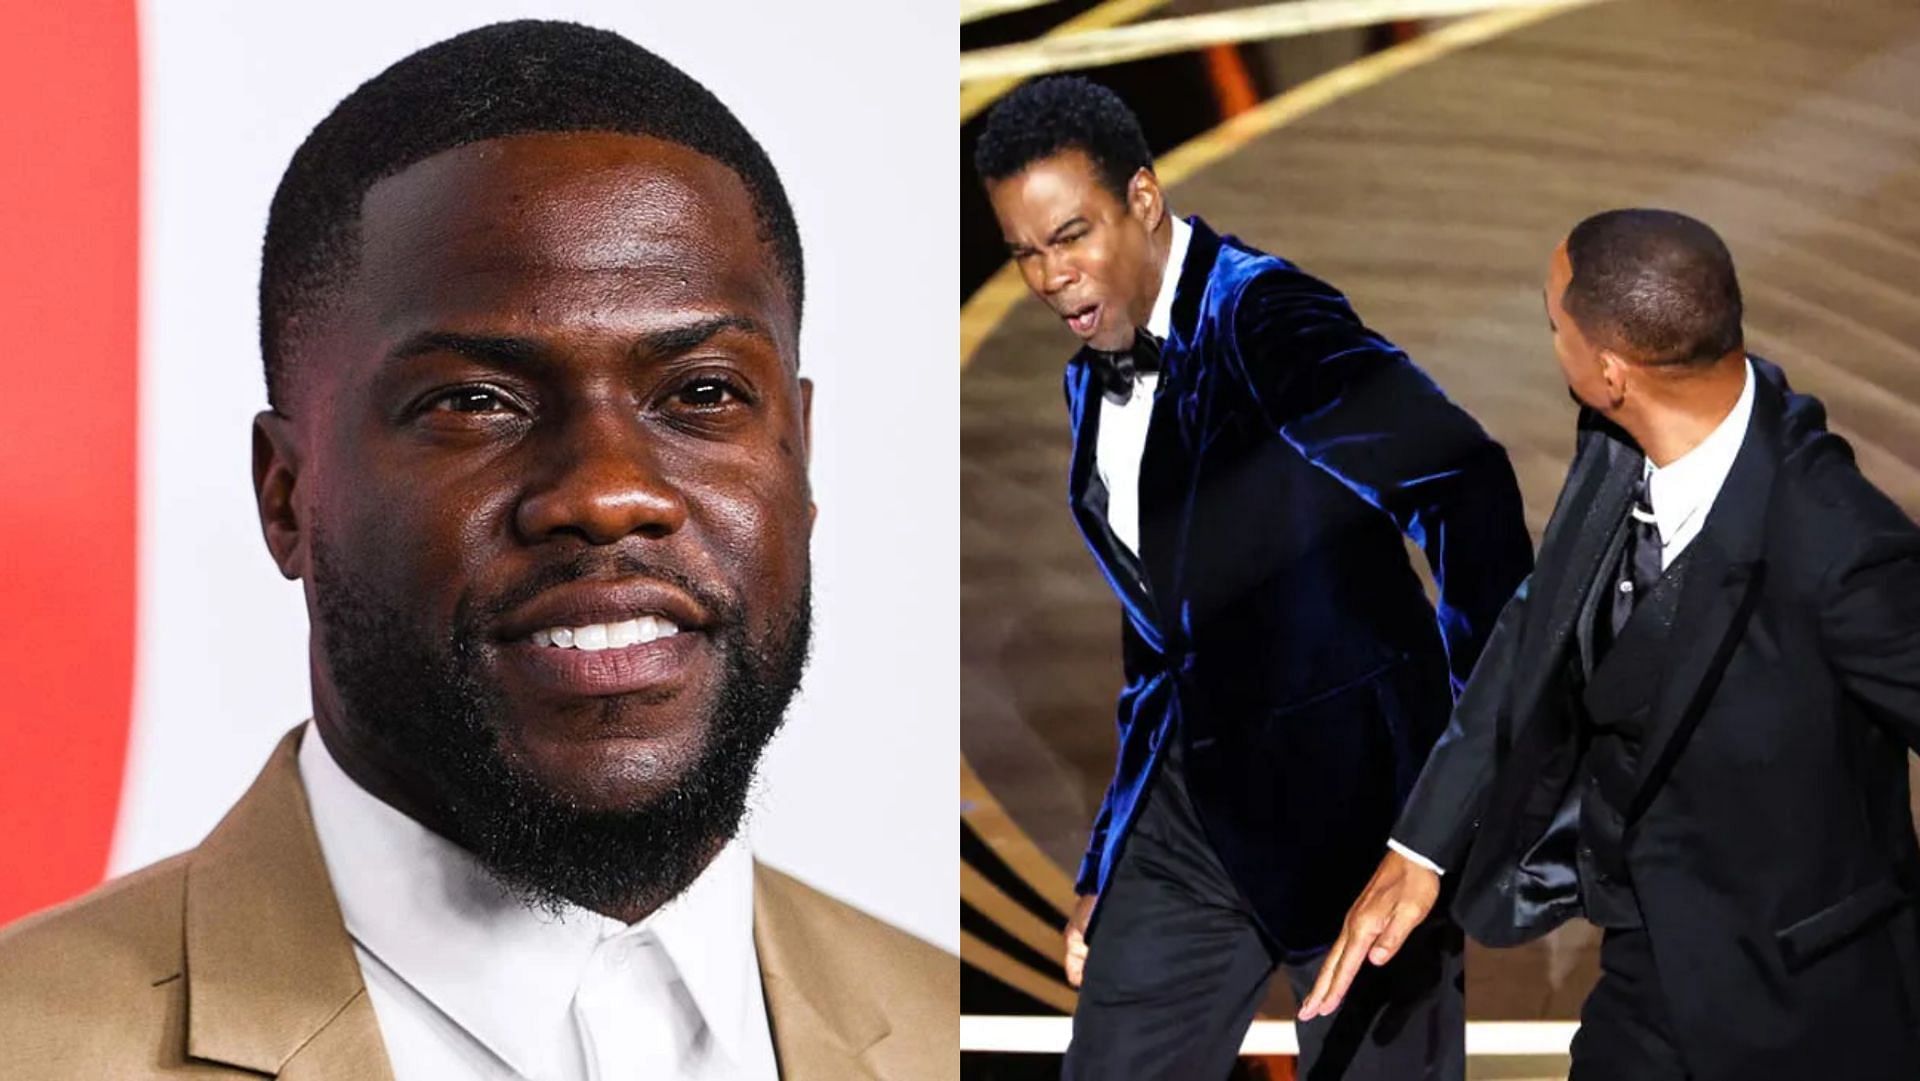 Kevin Hart is close friends with Will Smith and Chris Rock. (Image via James Gourley/Getty, Myung Chun/Getty)